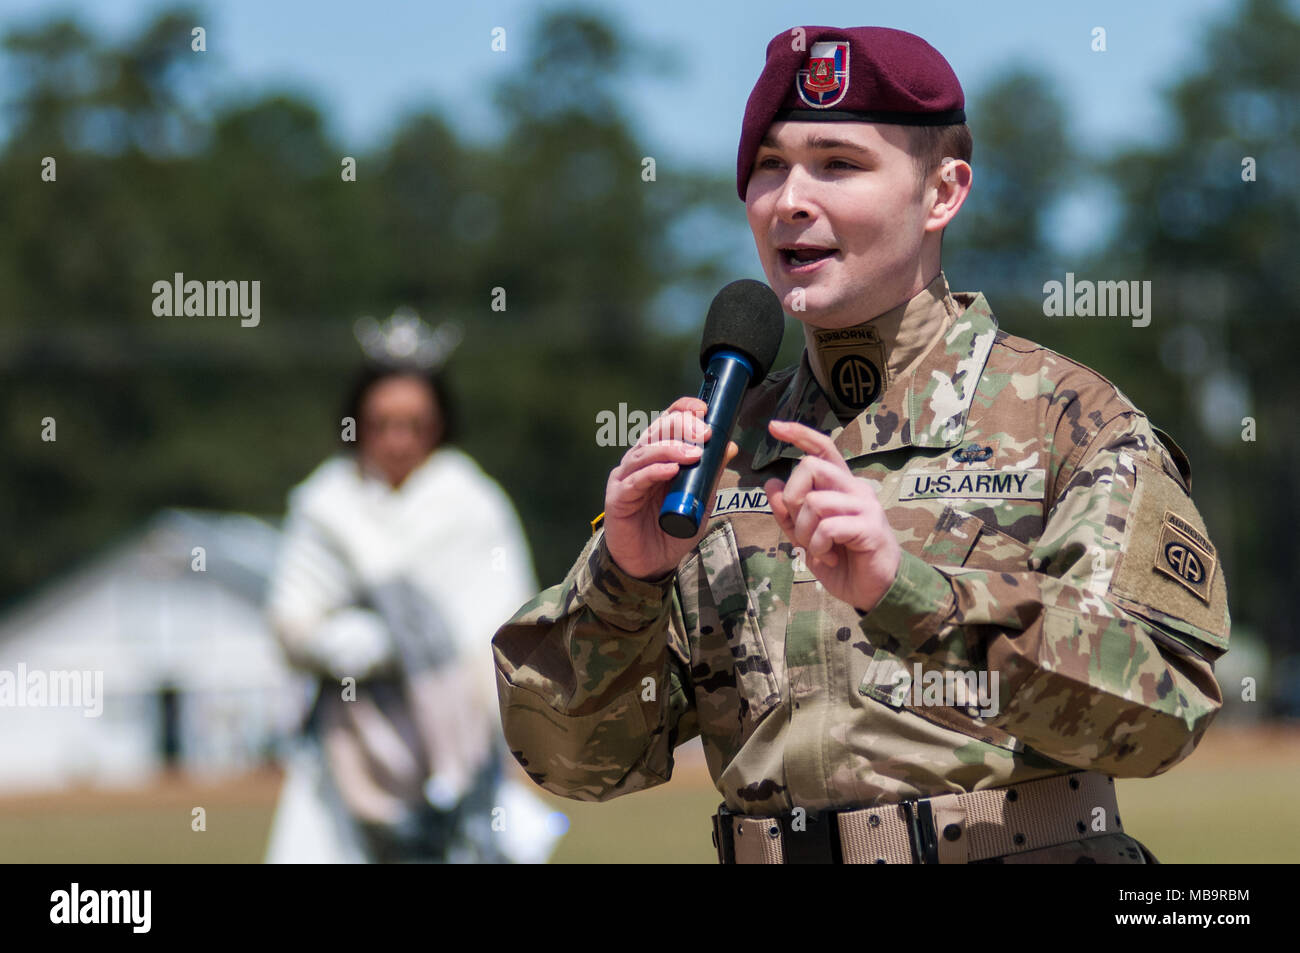 Pinehurst, North Carolina, USA. 8th Apr, 2018. April 8, 2018 - Pinehurst, N.C., USA - A soldier with the 82nd Airborne Division All American Chorus address race patrons at the 69th annual Spring Matinee Harness races sponsored by the Pinehurst Driving & Training Club, at the Pinehurst Harness Track, Pinehurst, N.C. The Pinehurst Harness Track is a 111-acre equestrian facility that has been a winter training center for standardbred horses since 1915. This year's races commemorate the 103rd anniversary of the track. Credit: Timothy L. Hale/ZUMA Wire/Alamy Live News Stock Photo